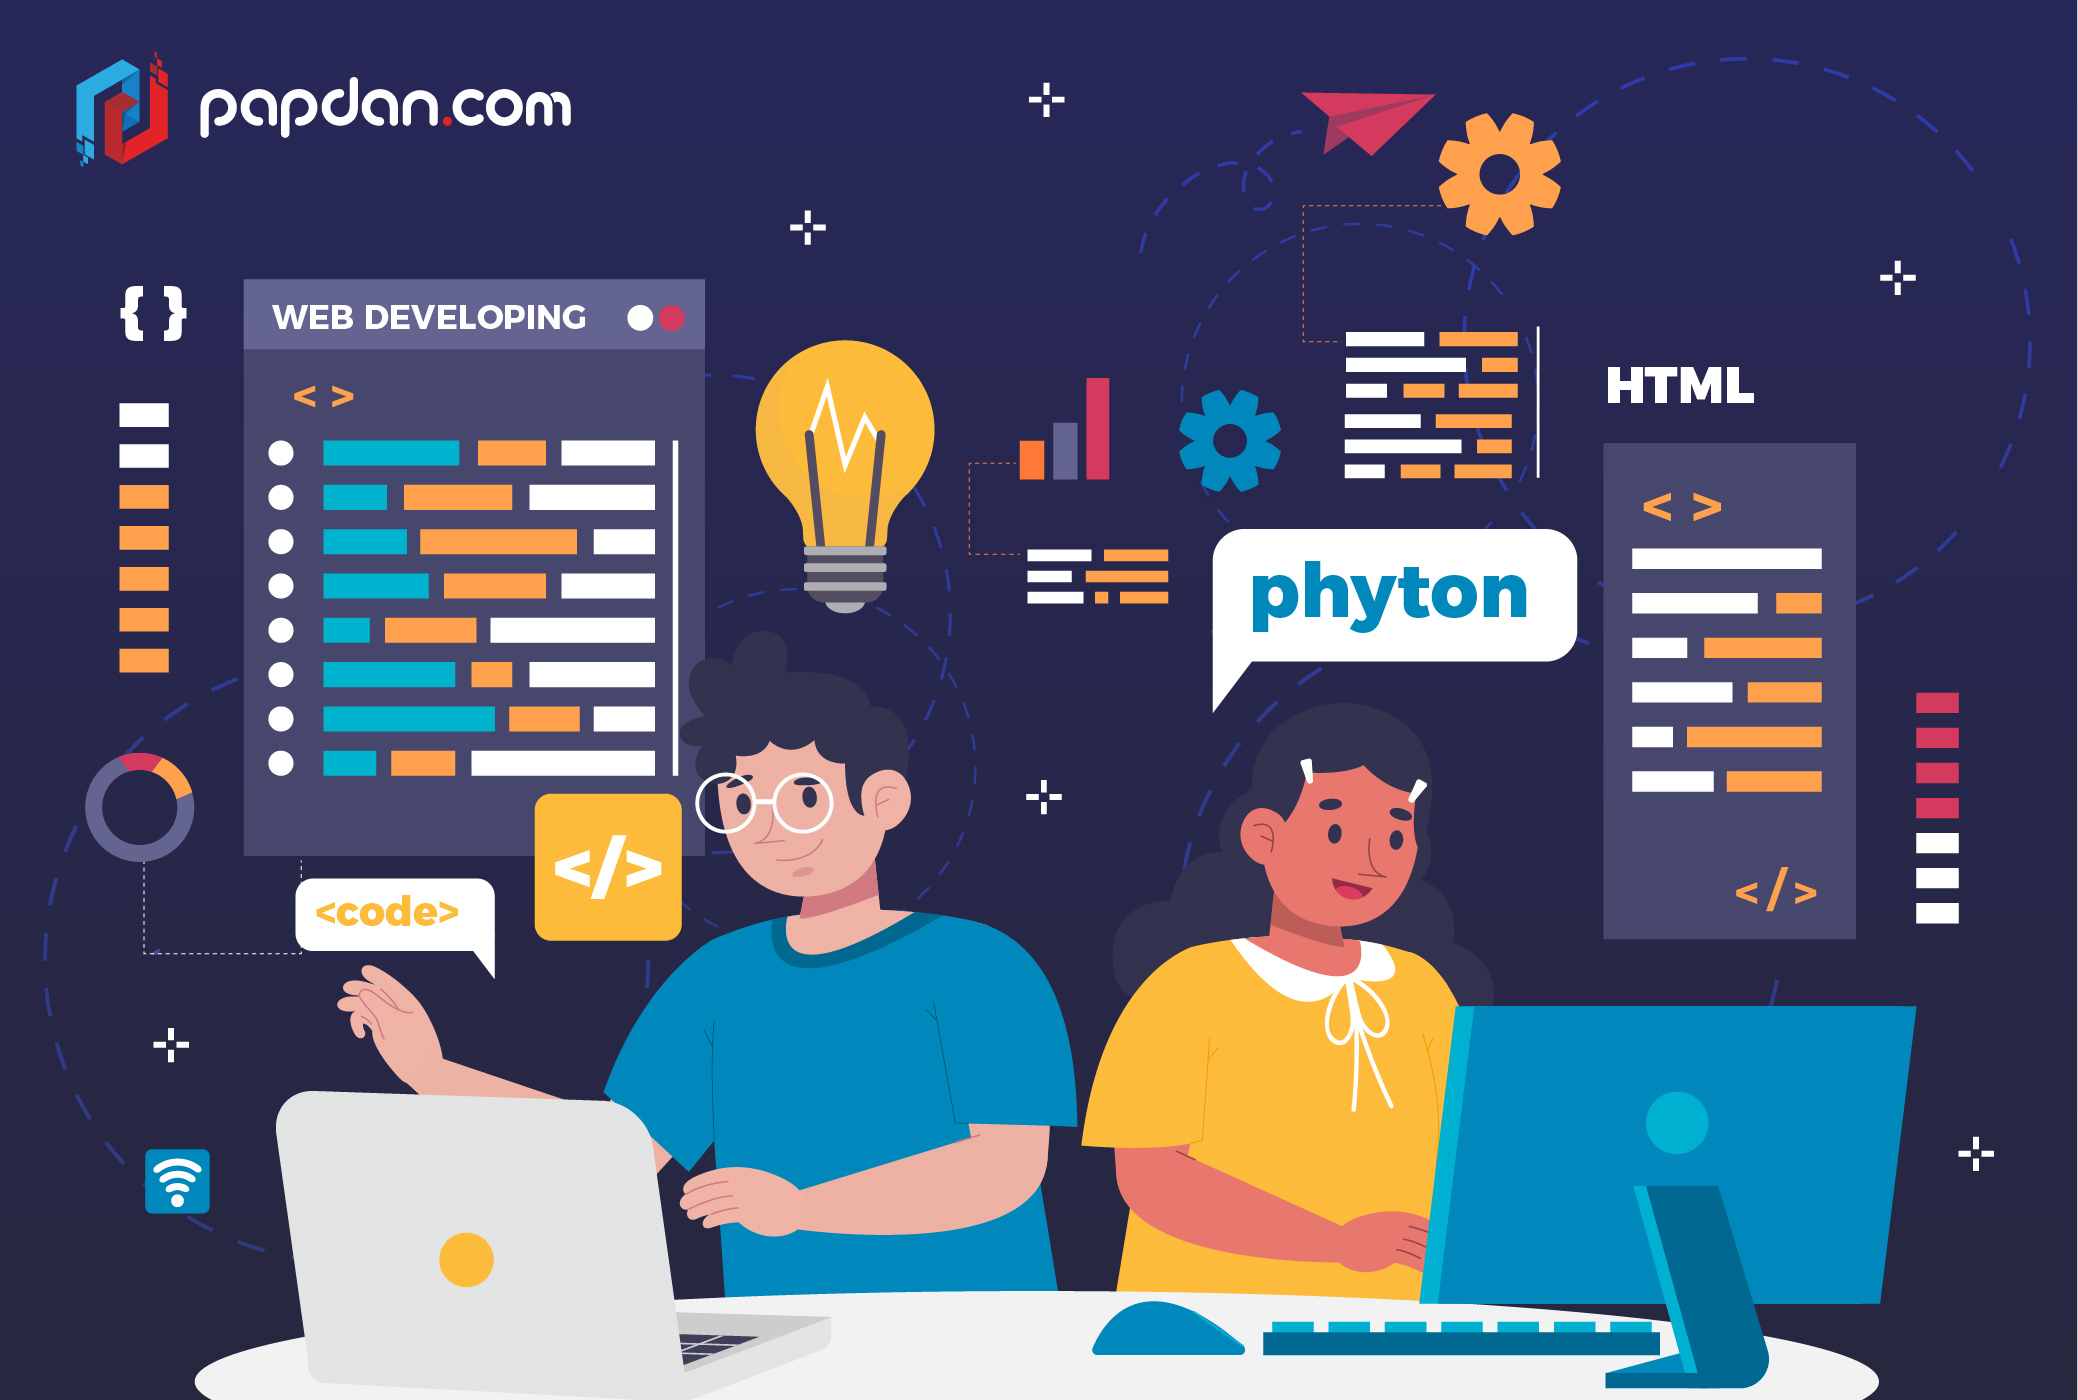 Doubting Python? These 3 Reasons Will Change Your Mind!